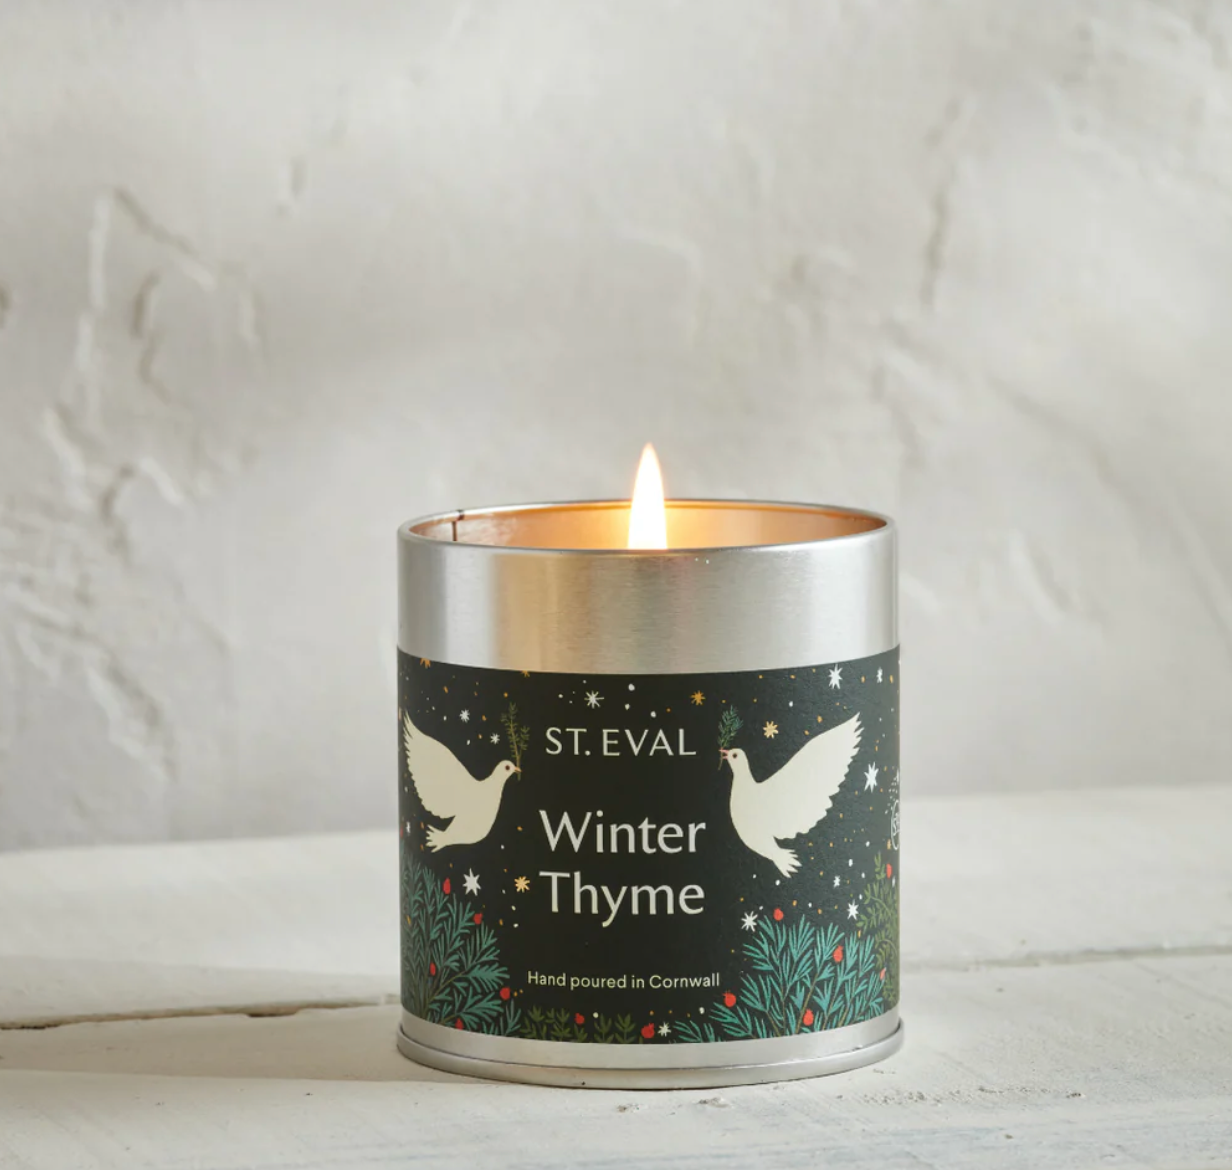 St Eval Winter Thyme Scented Tin Candle